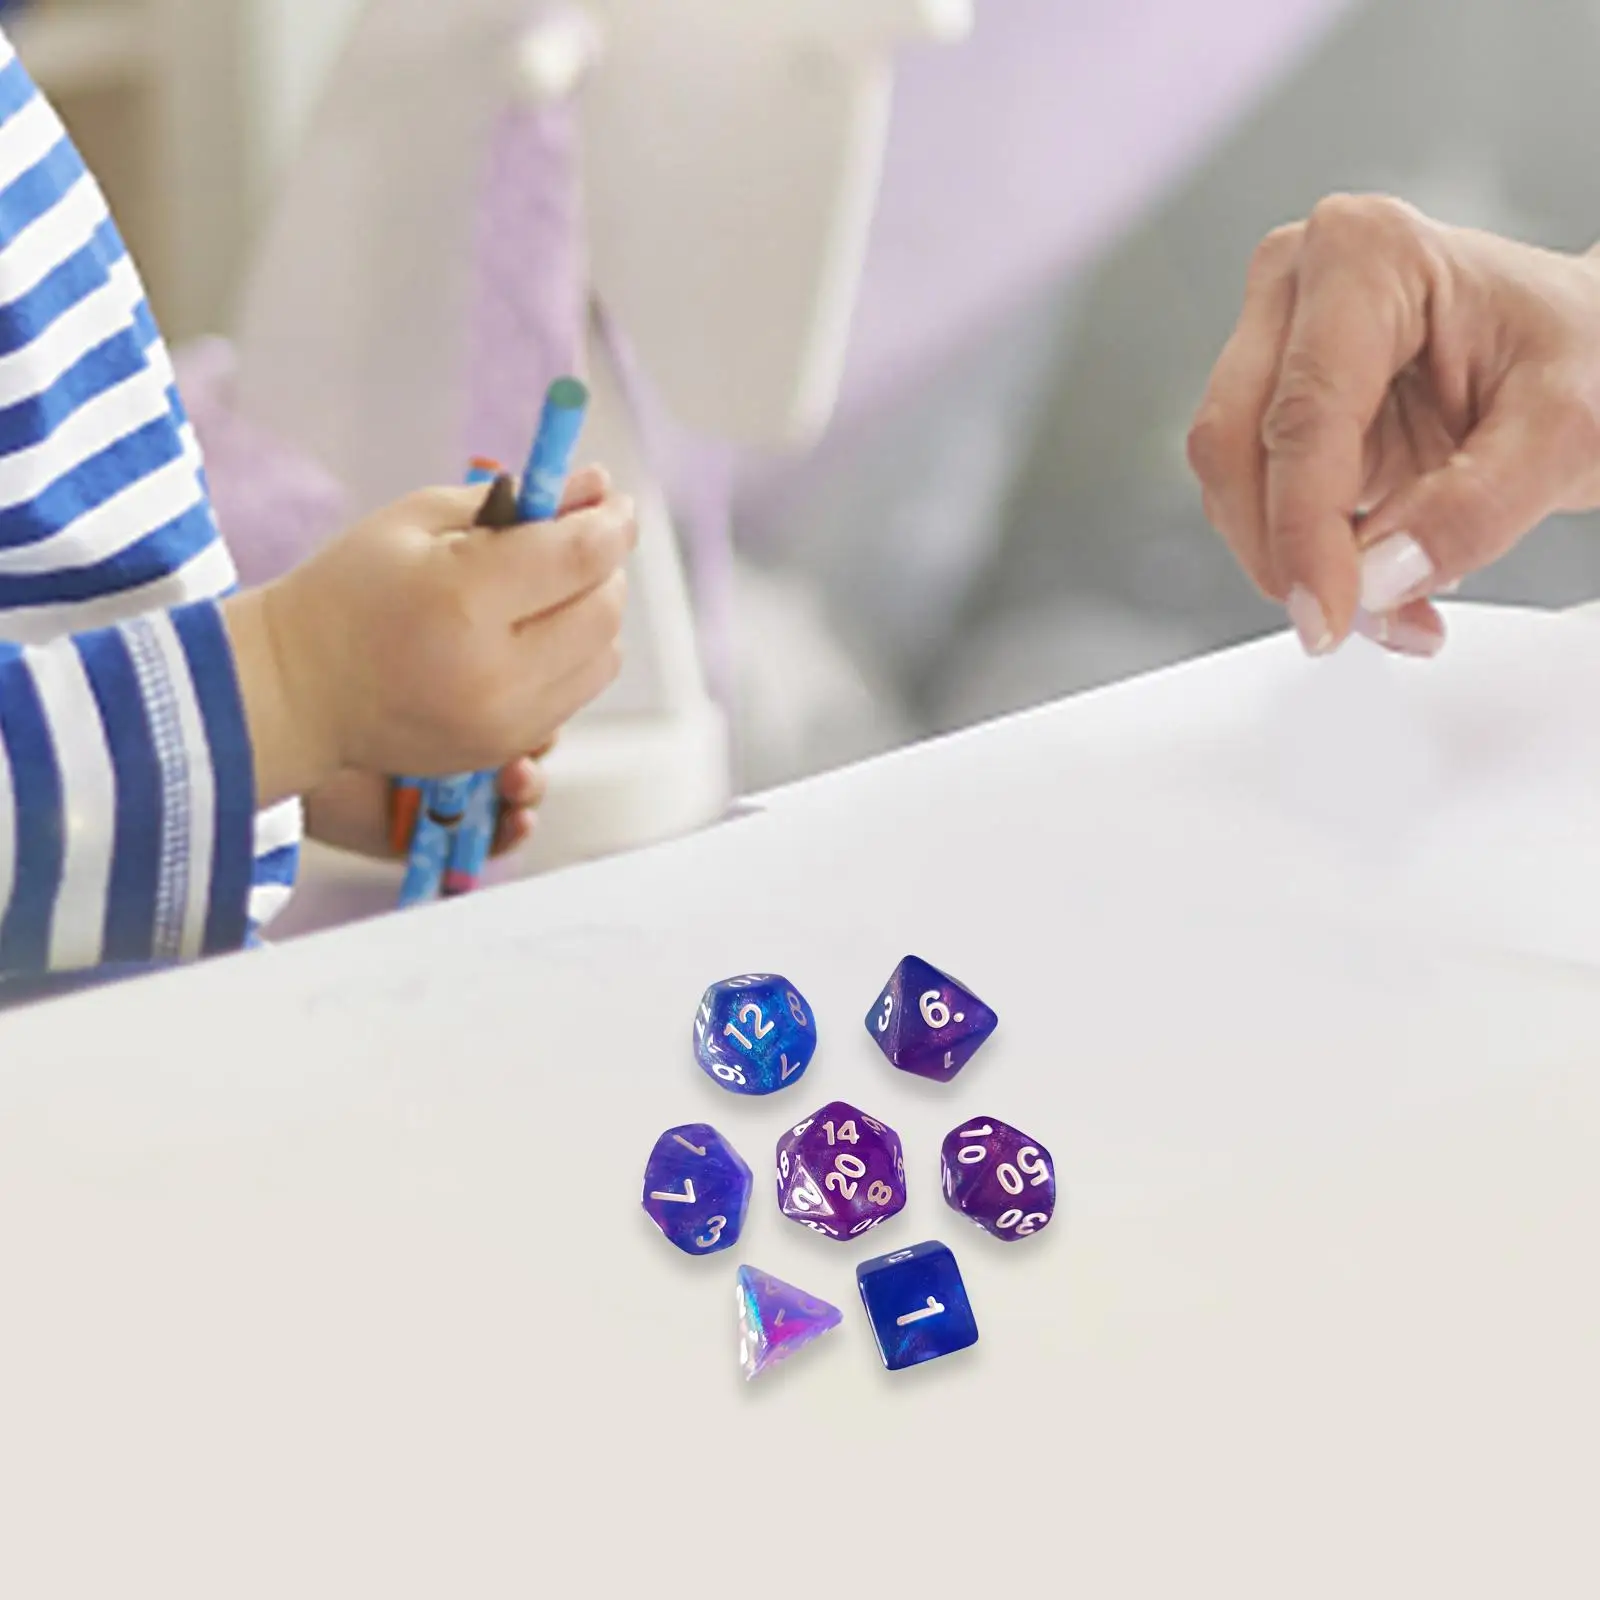 7PCS Acrylic Polyhedral Dices Set D4-D20 Multicolour Dices Math Teaching Assortment for TCG Role Playing Table Game Card Games